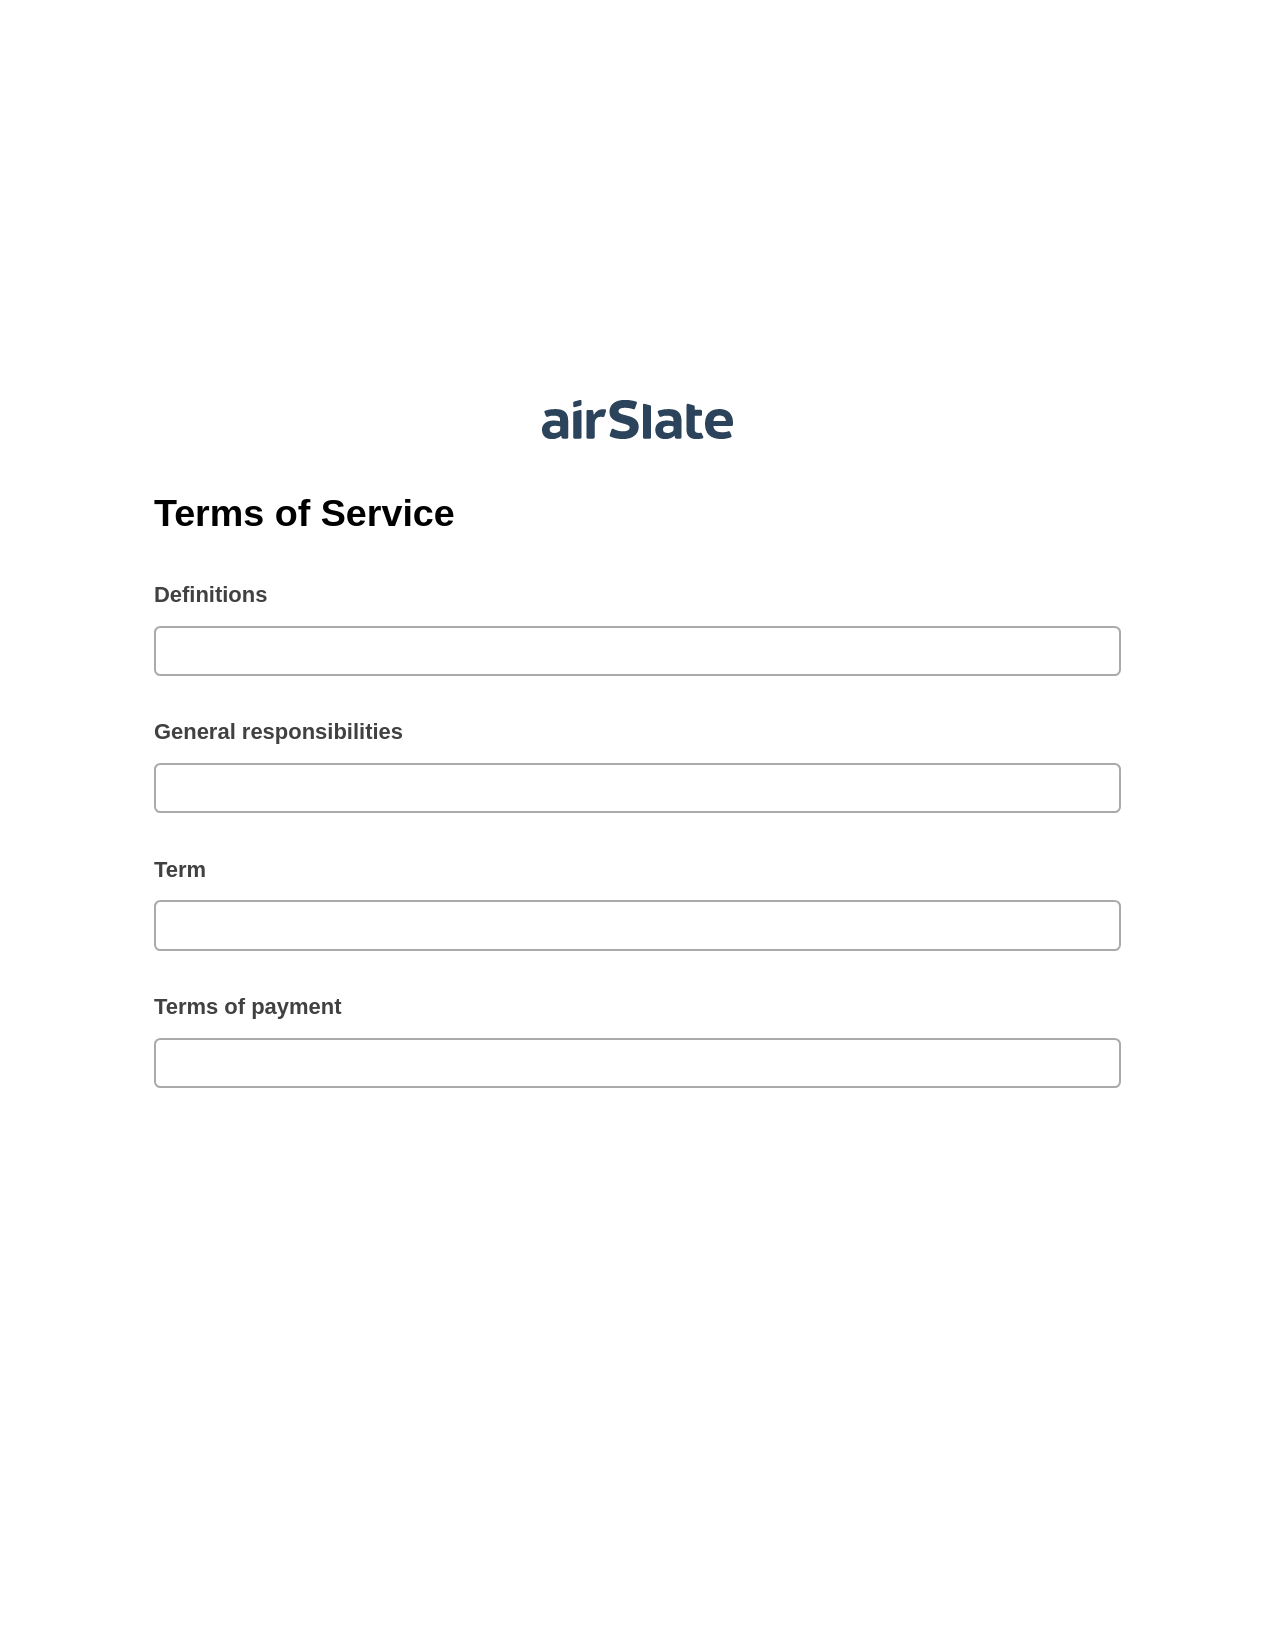 Multirole Terms of Service Pre-fill from Google Sheet Dropdown Options Bot, Create slate addon, Export to Salesforce Bot